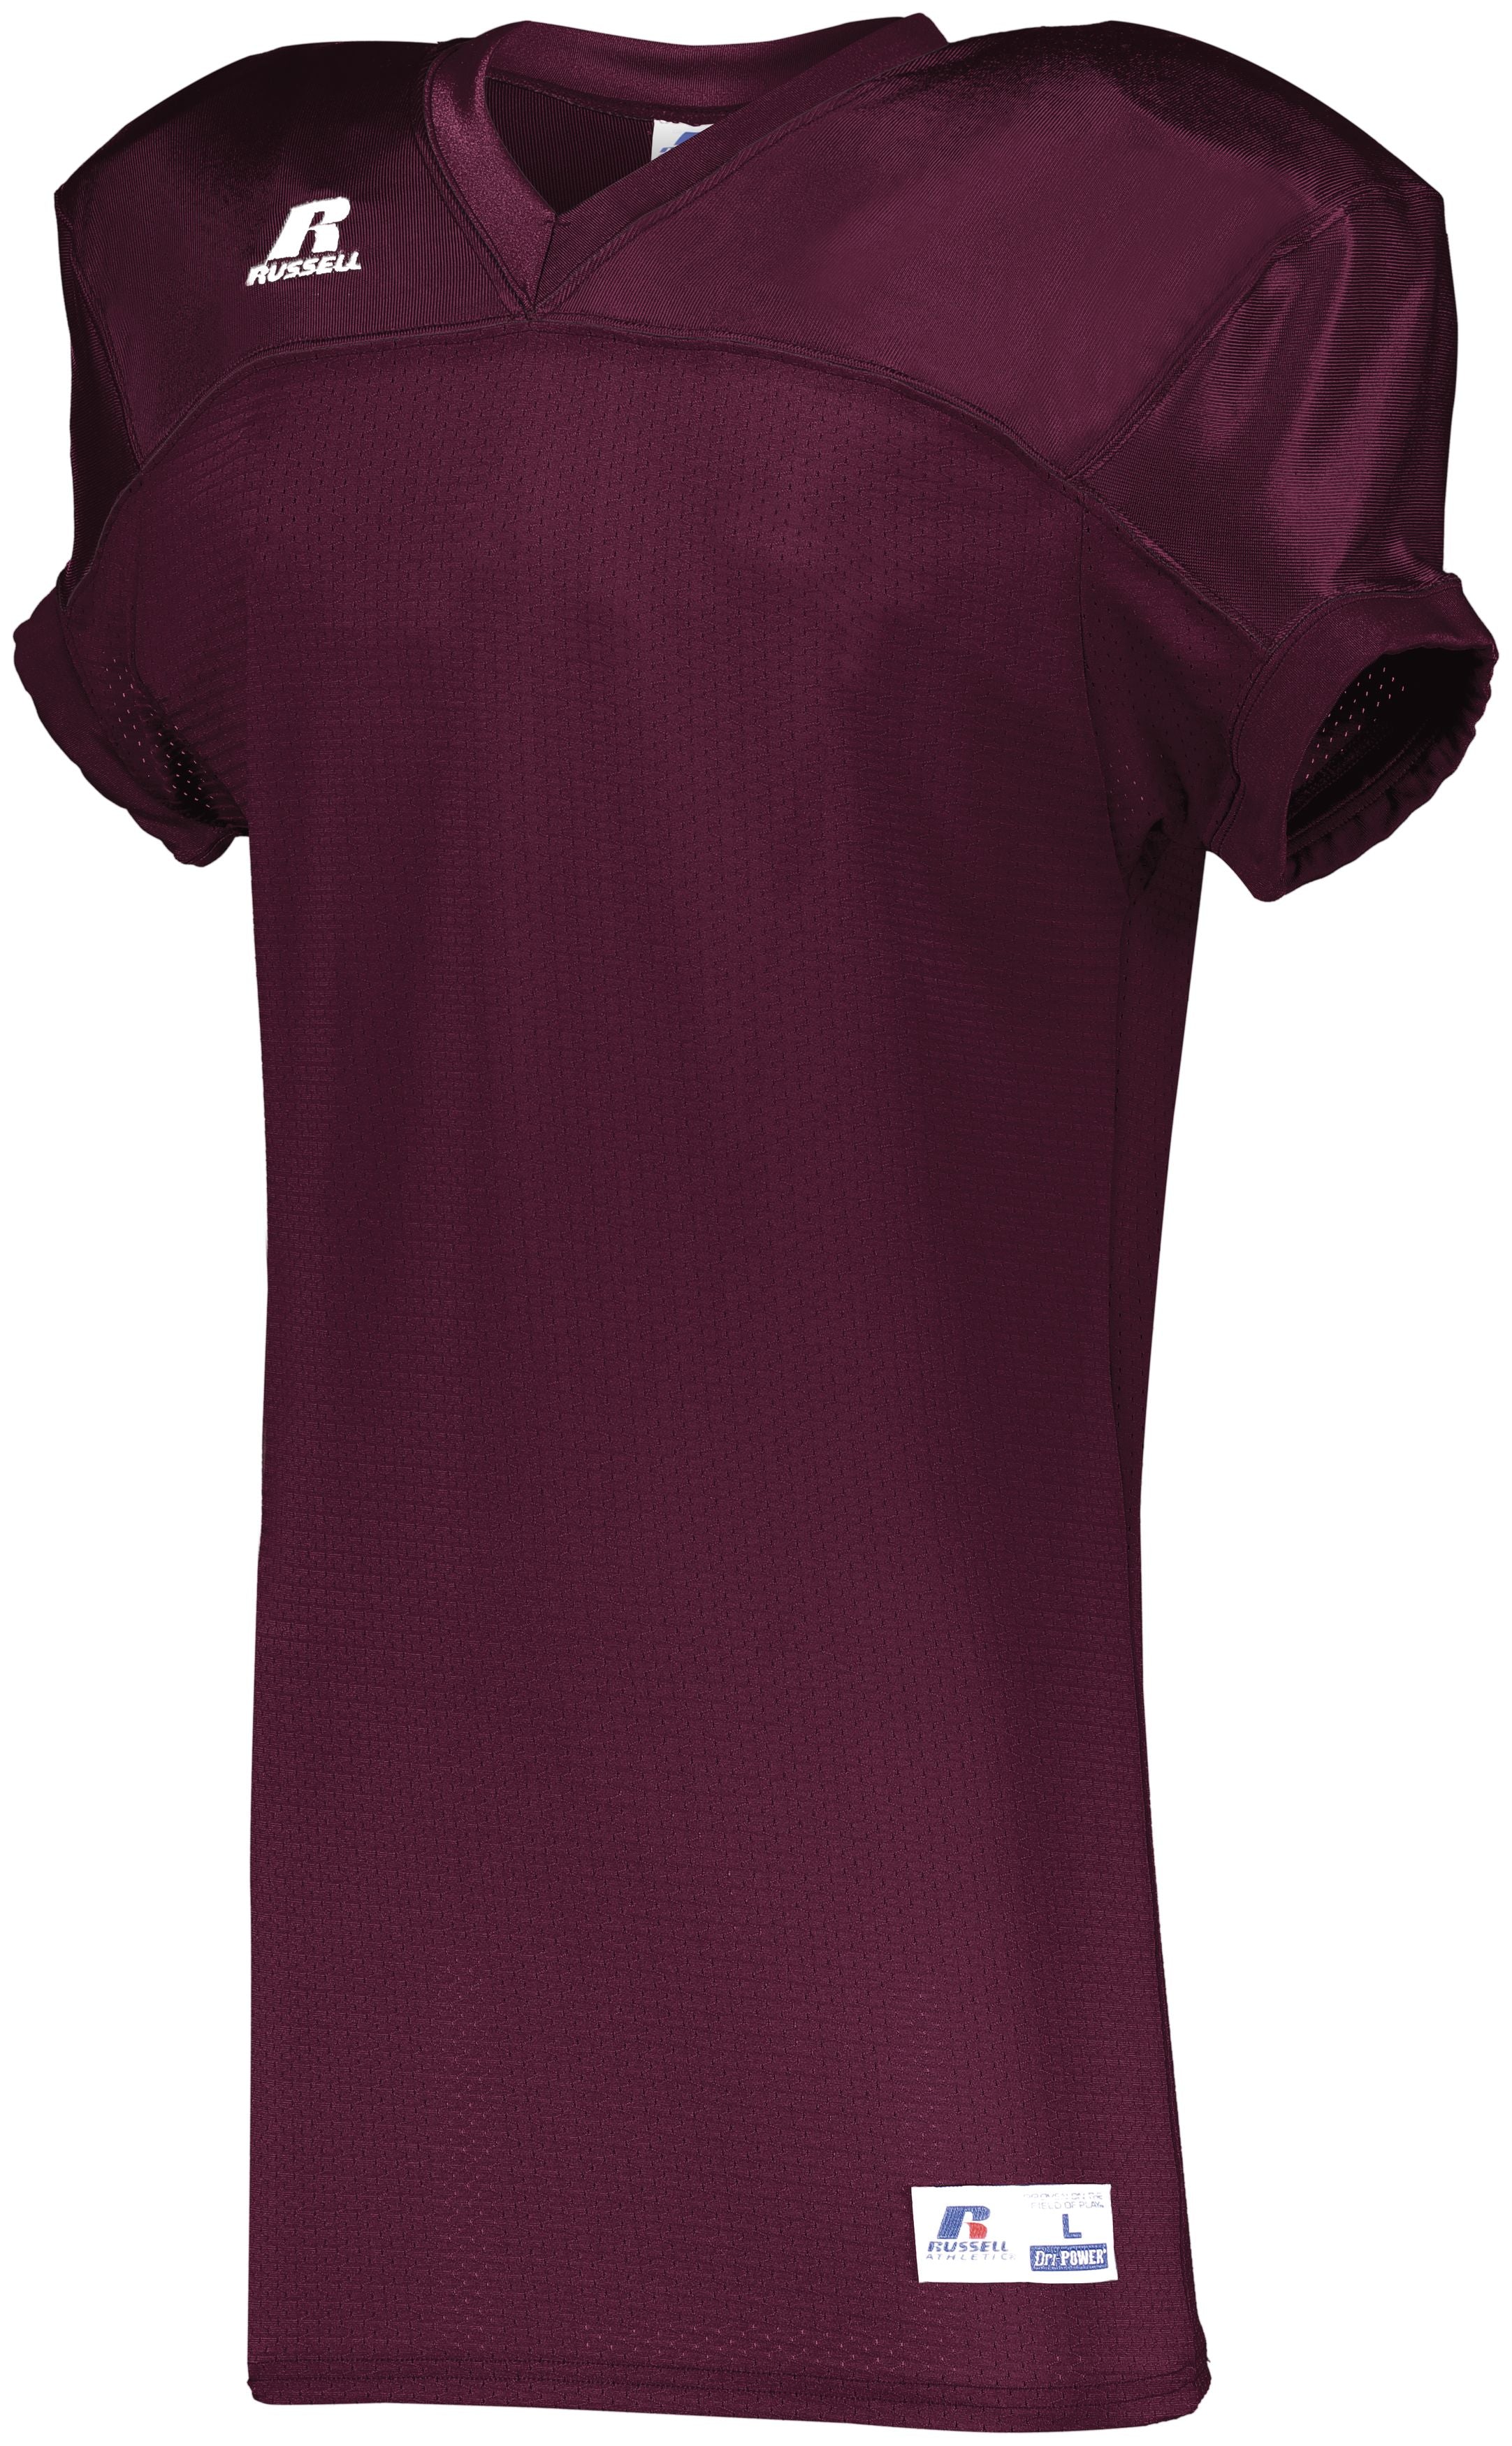 Russell Athletic Stretch Mesh Game Jersey in Maroon  -Part of the Adult, Adult-Jersey, Football, Russell-Athletic-Products, Shirts, All-Sports, All-Sports-1 product lines at KanaleyCreations.com